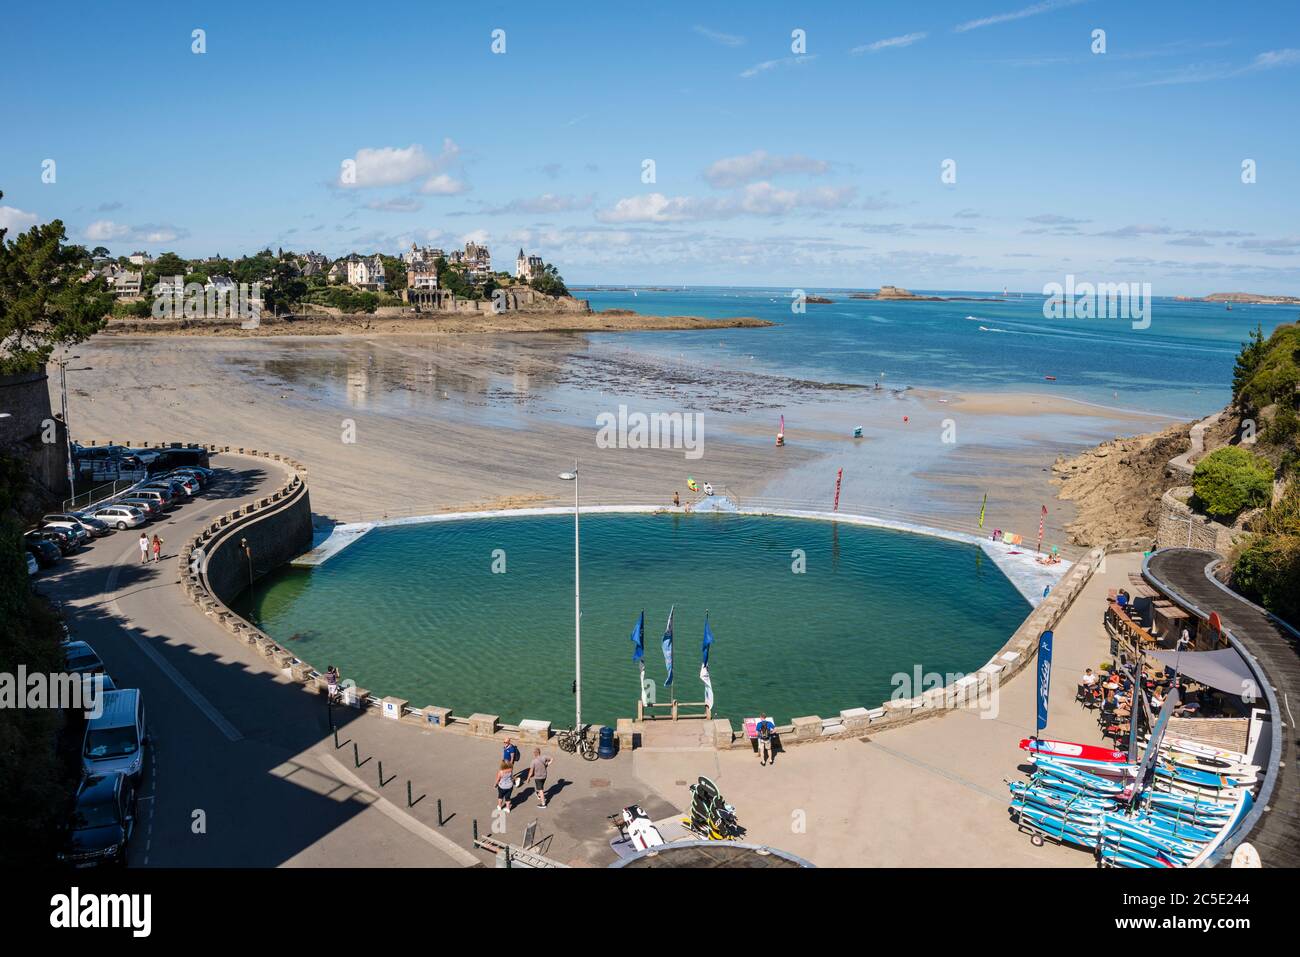 Seawater pool on the beach, Plage de L'Ecluse, Dinard, Brittany, France Stock Photo